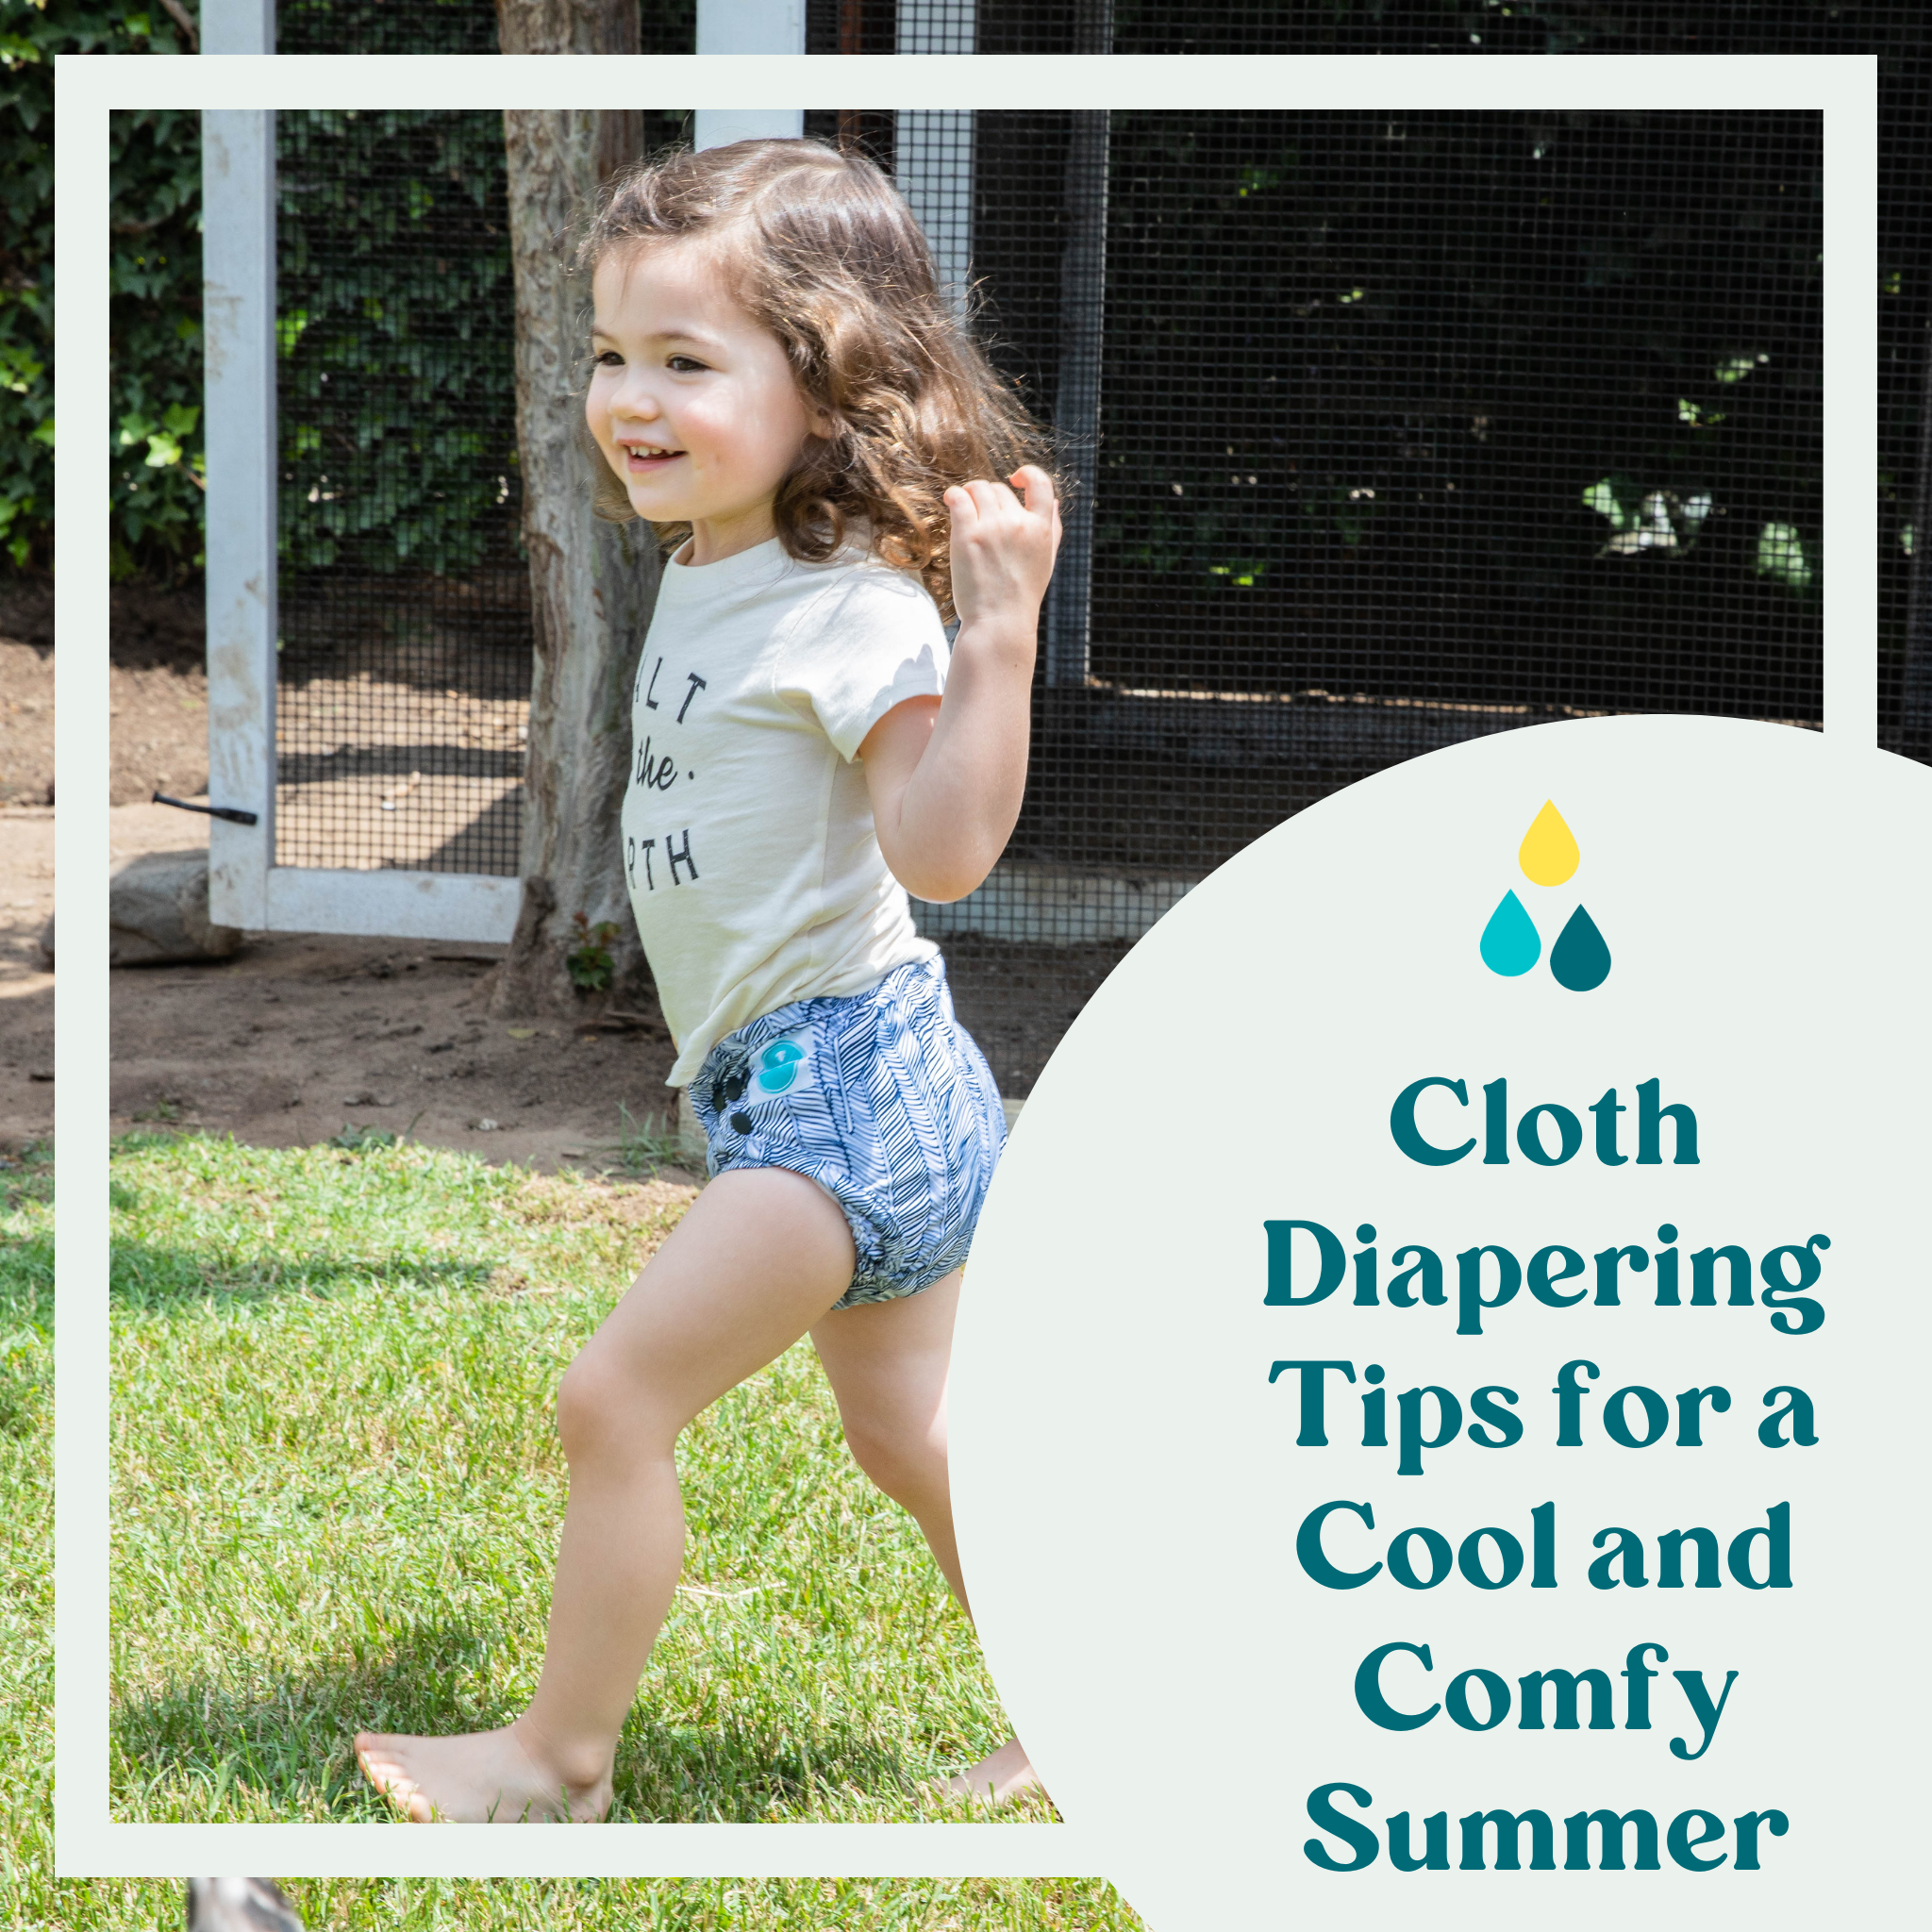 Cloth Diapering Tips for a Cool and Comfy Summer